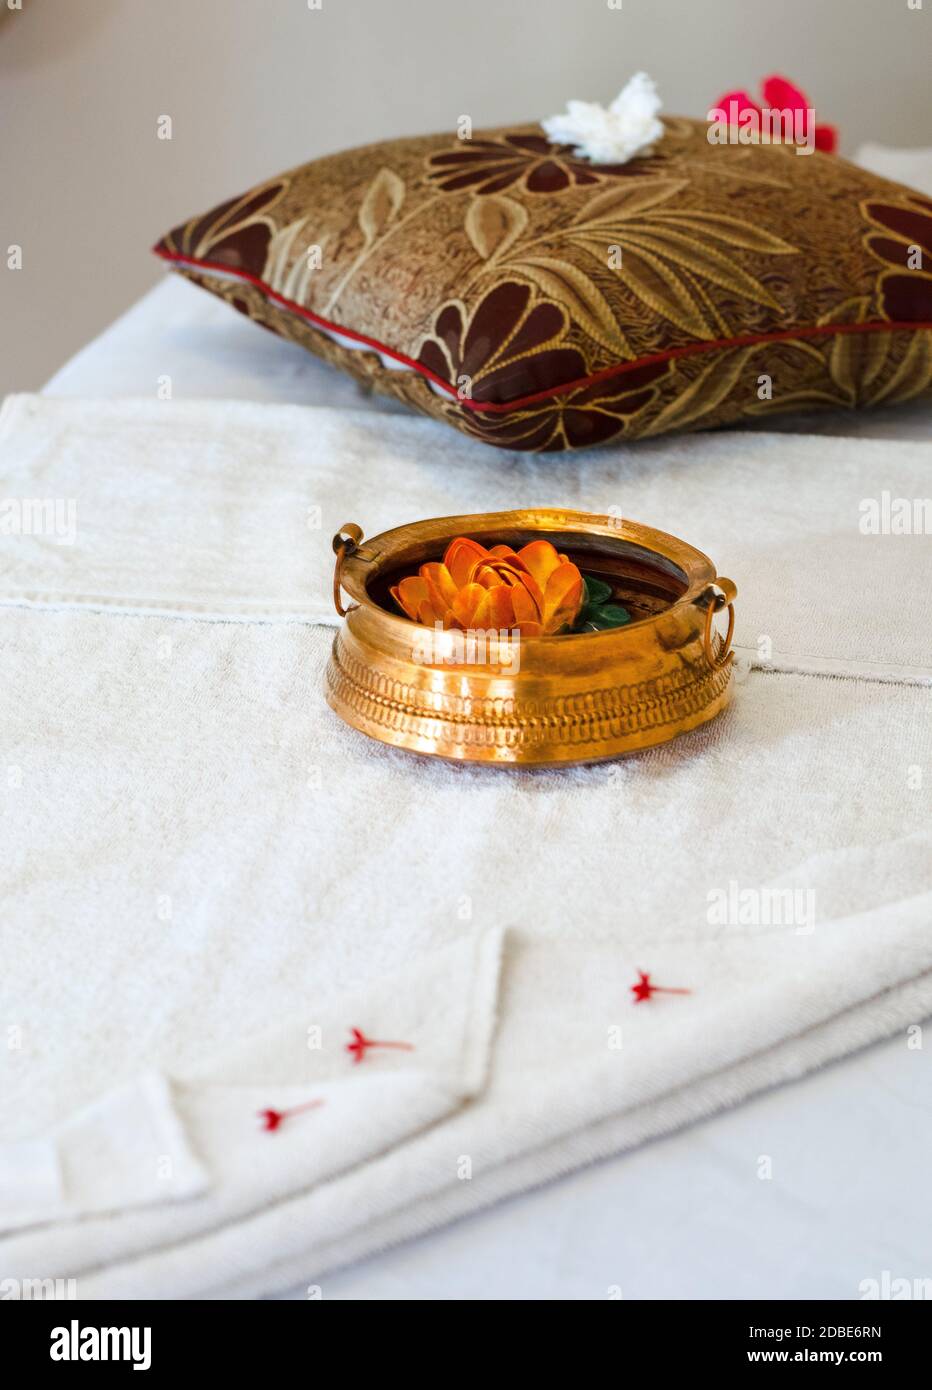 Luxury body massage set with folded towels, flower petals, pebble stones and copper containers on a massage bed Stock Photo